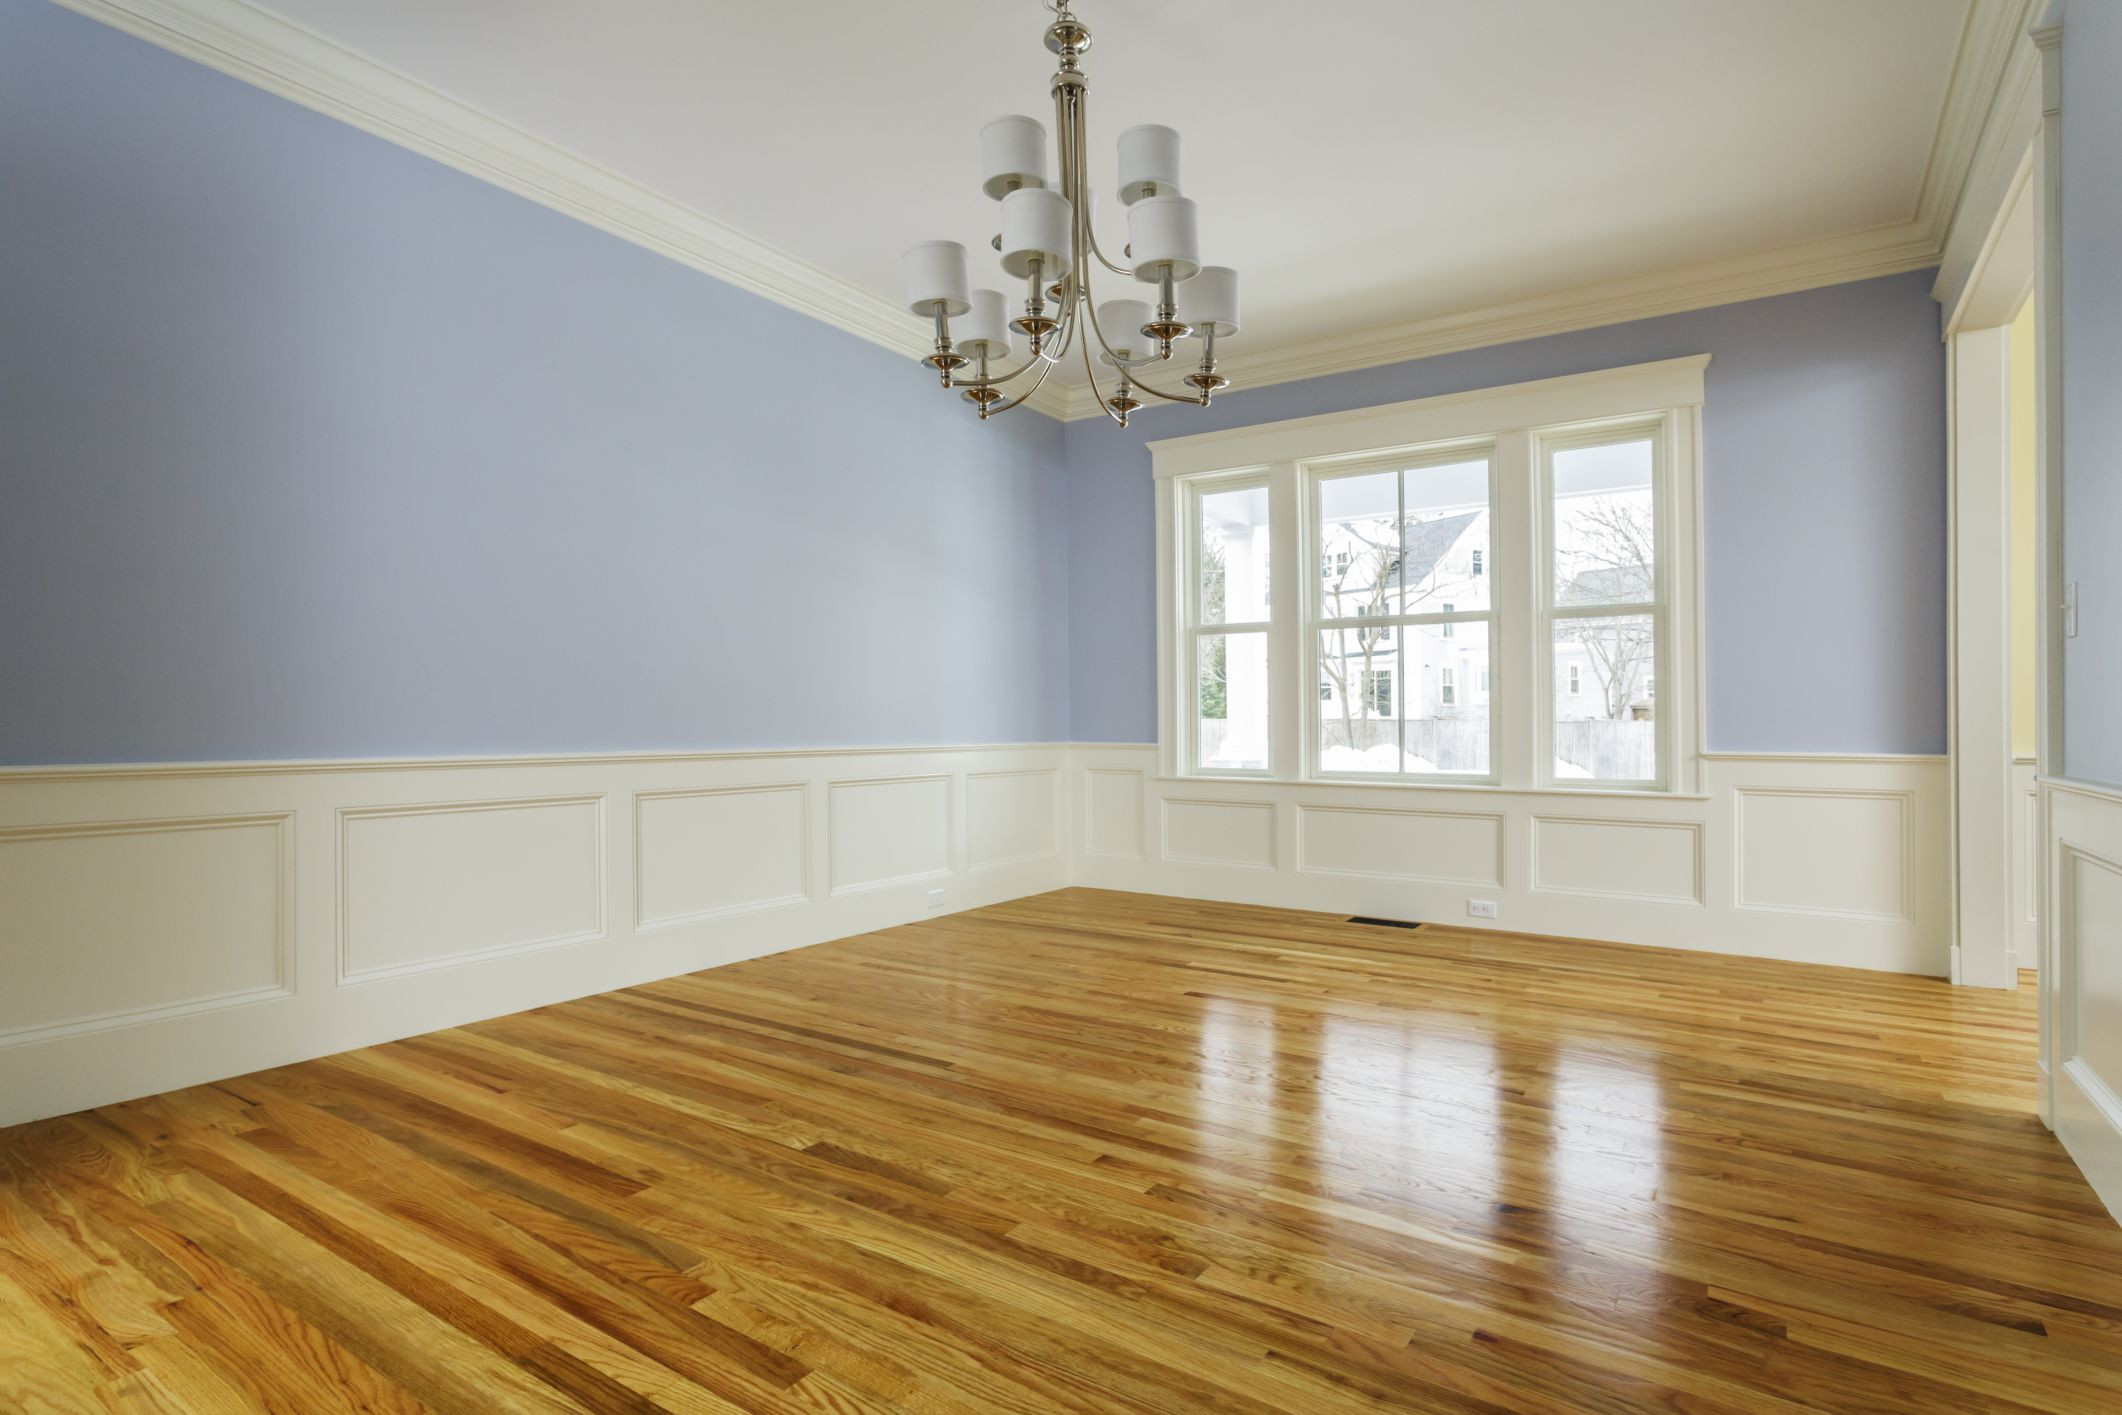 17 Ideal Diy Hardwood Floor Shine 2024 free download diy hardwood floor shine of how to make hardwood floors shiny pertaining to 168686572 56a4e87c3df78cf7728544a2